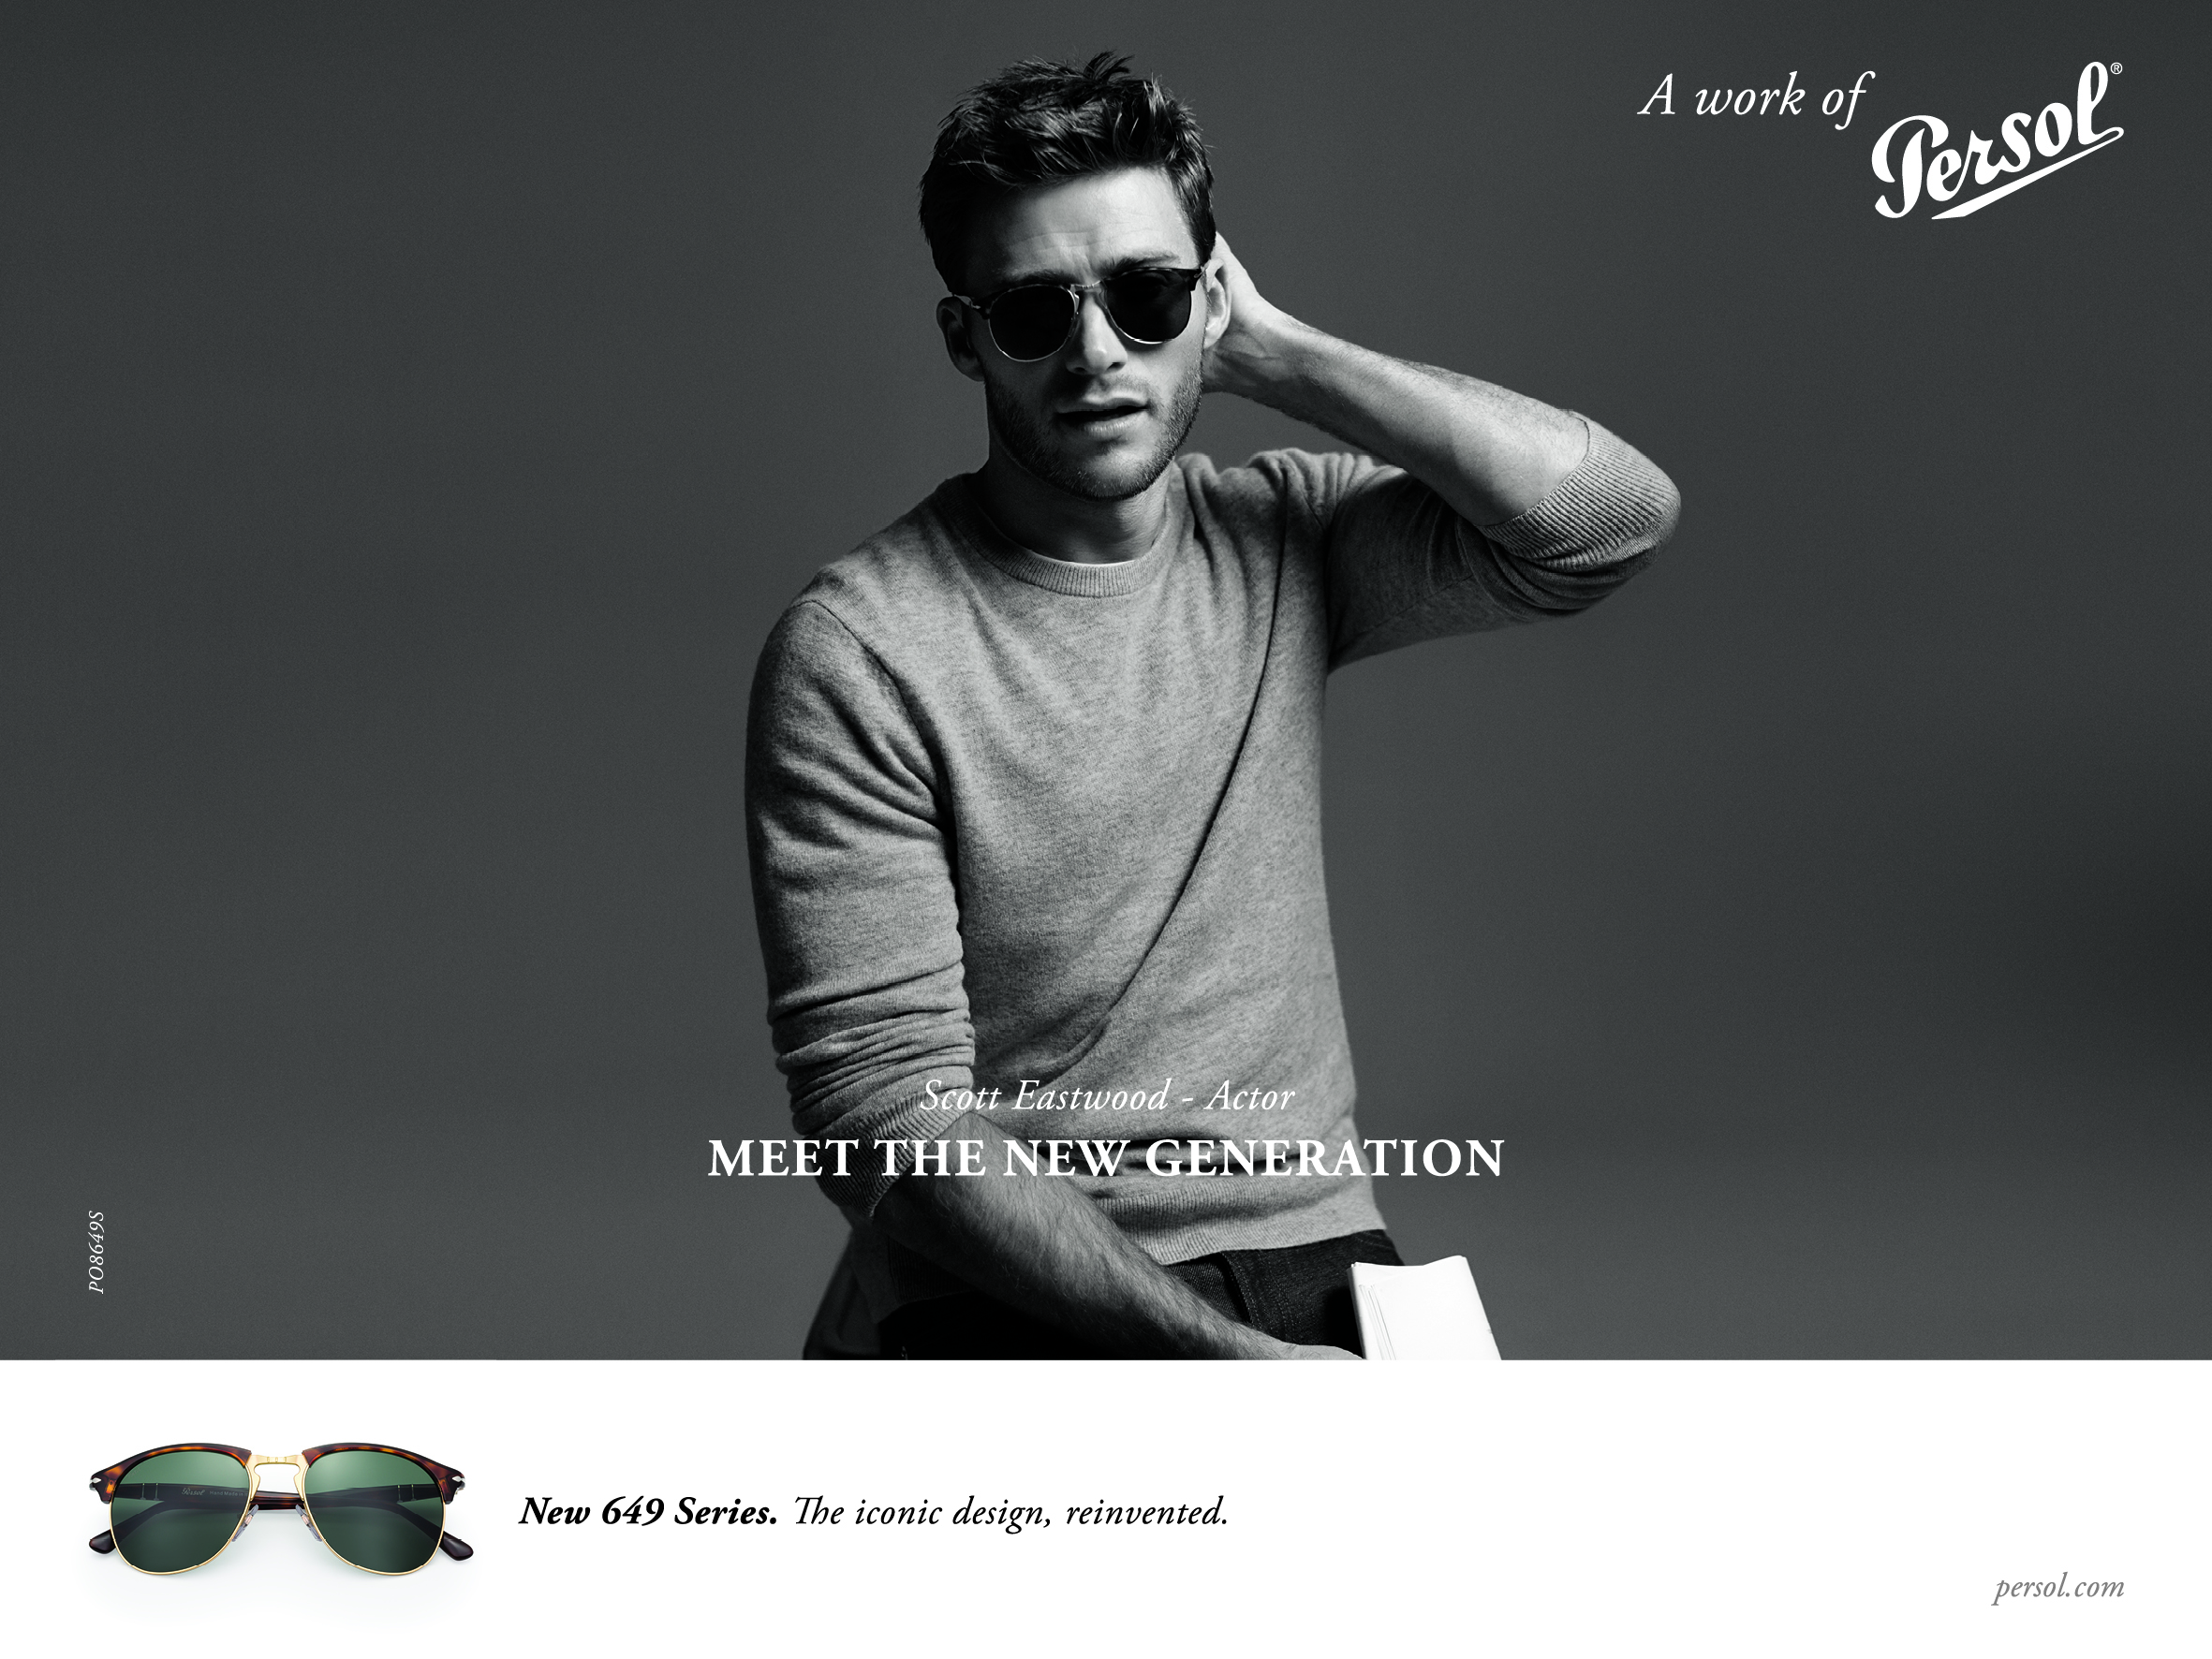 Scott Eastwood Persol Spring Summer 2016 Campaign